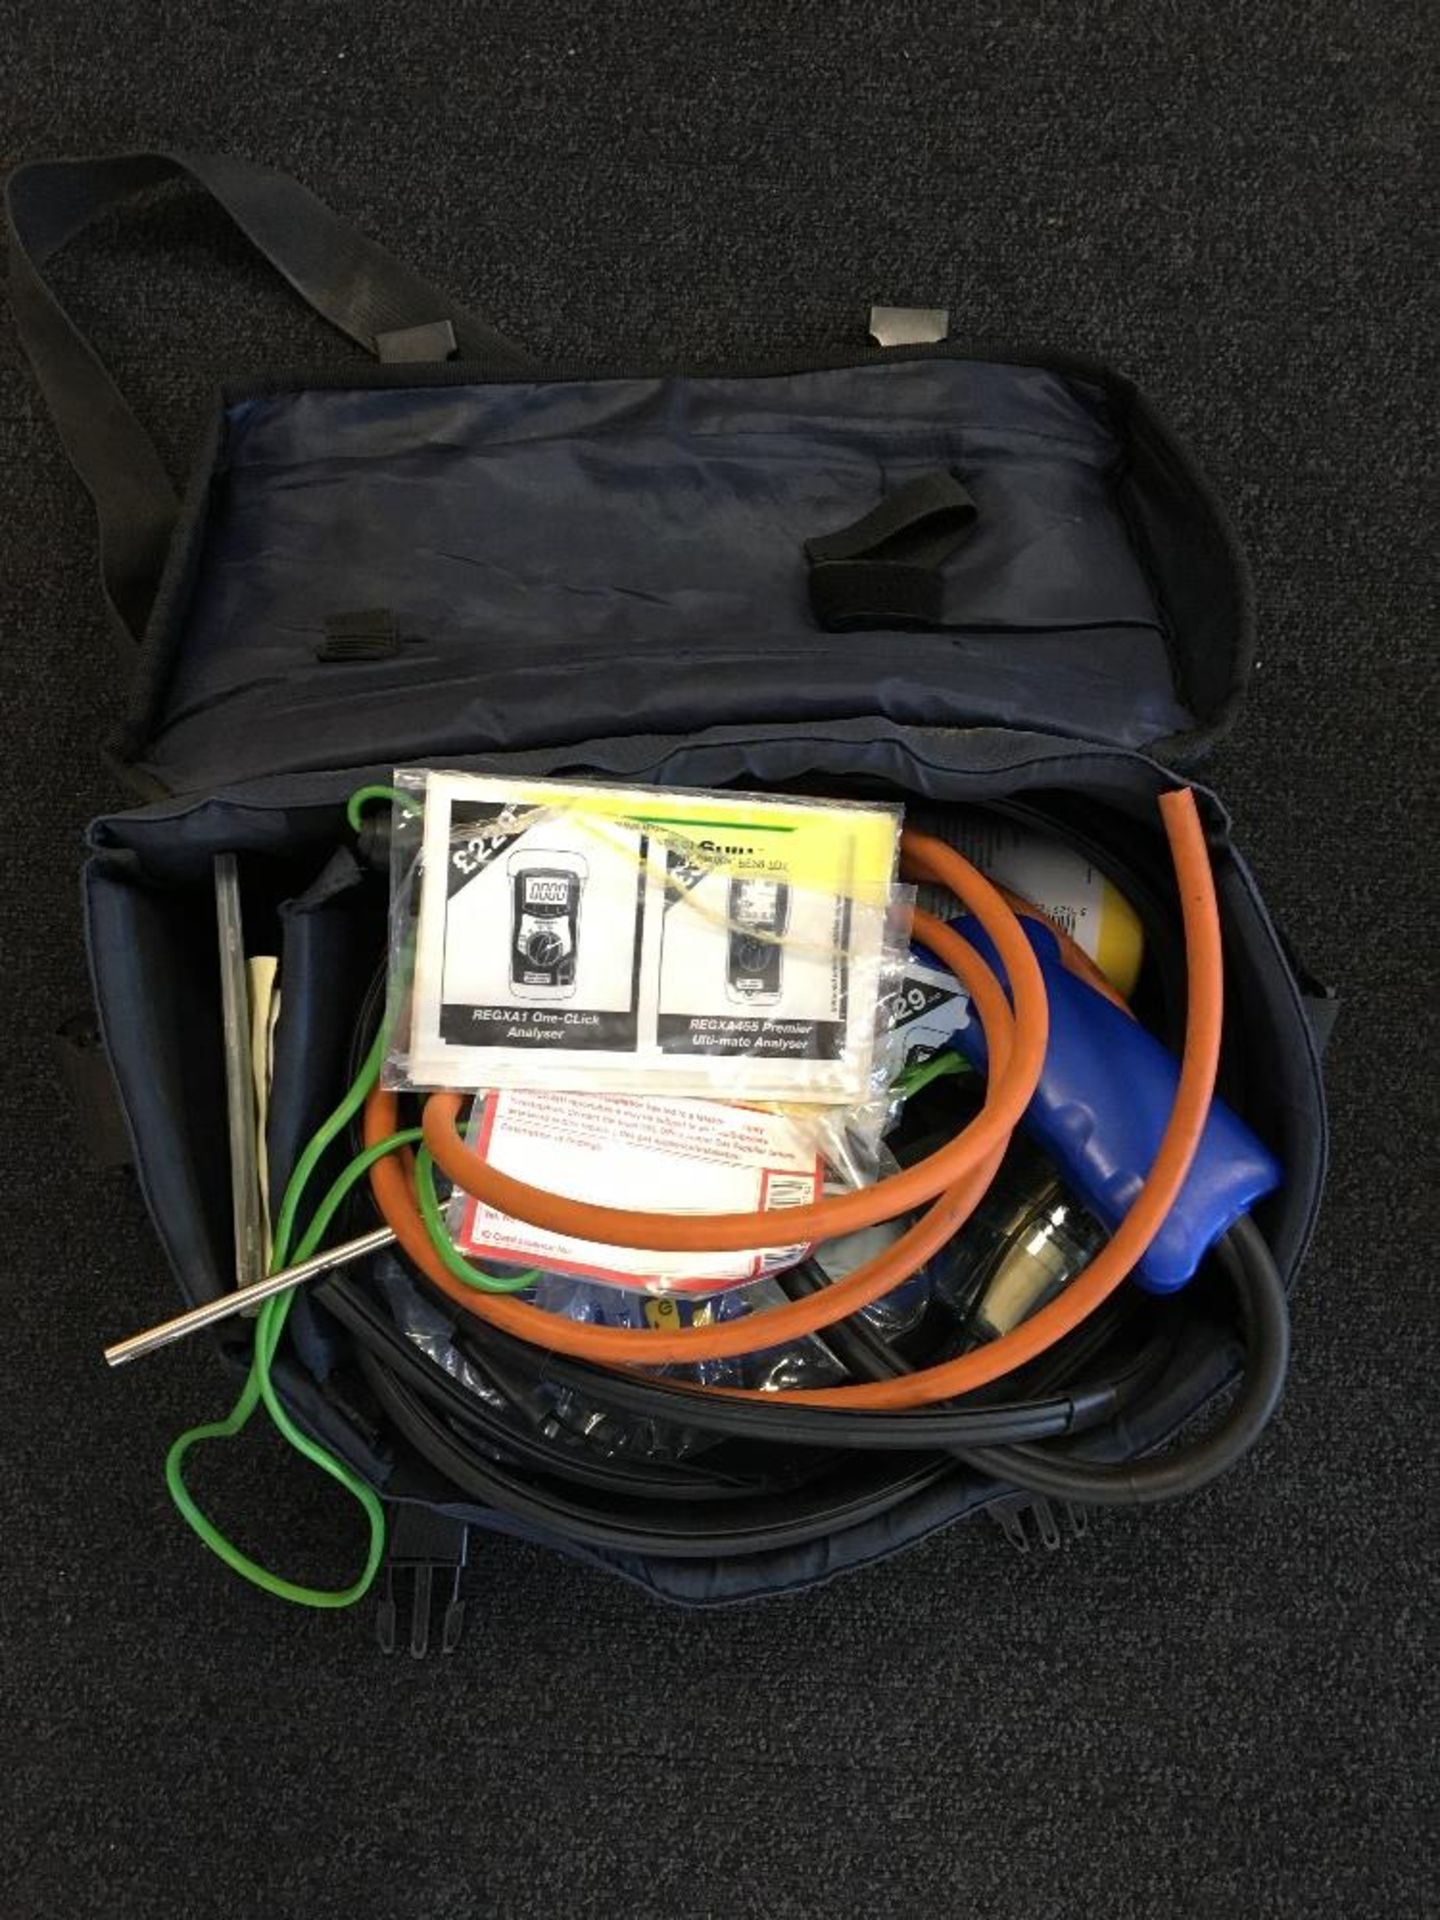 Sprint EVO1 Flue Gas Analyser Kit with carry case - Image 2 of 4